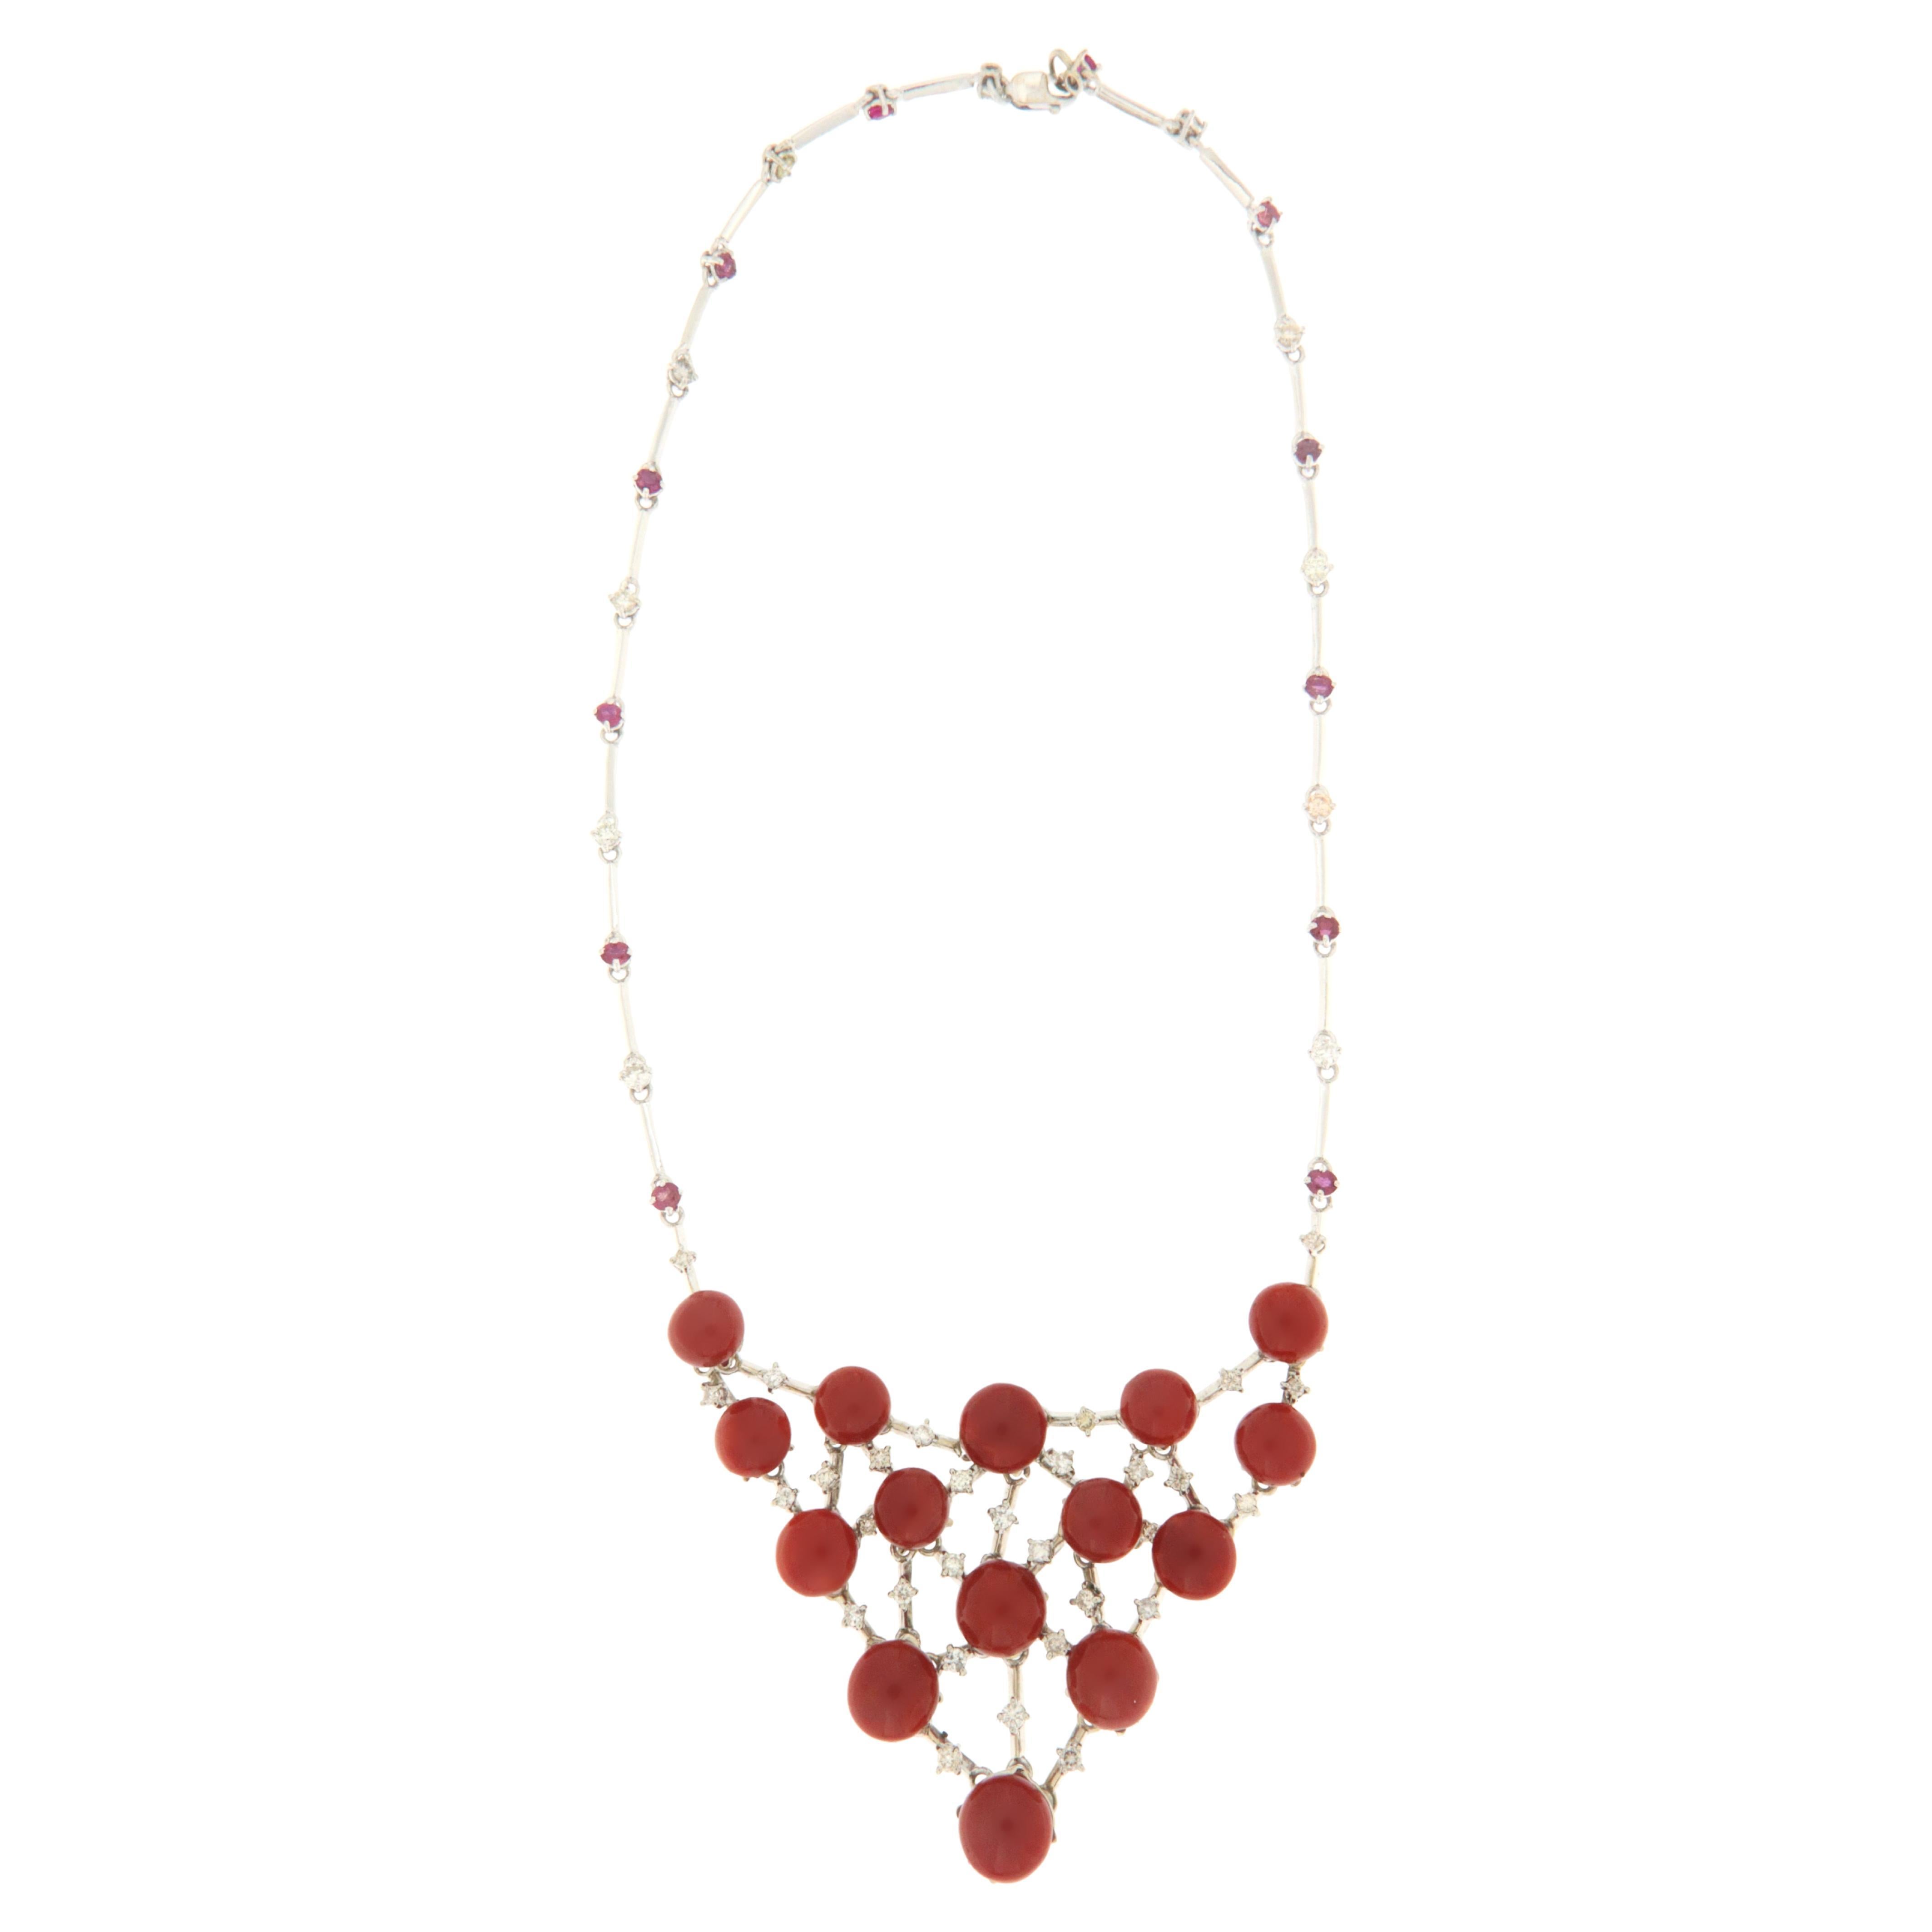 Delicate necklace made entirely by hand by artisans in southern Italy composed in 18-karat white gold, natural diamonds and small natural corals that enrich the design.
A simple jewel to use in any circumstance, delicate to the touch, suitable for